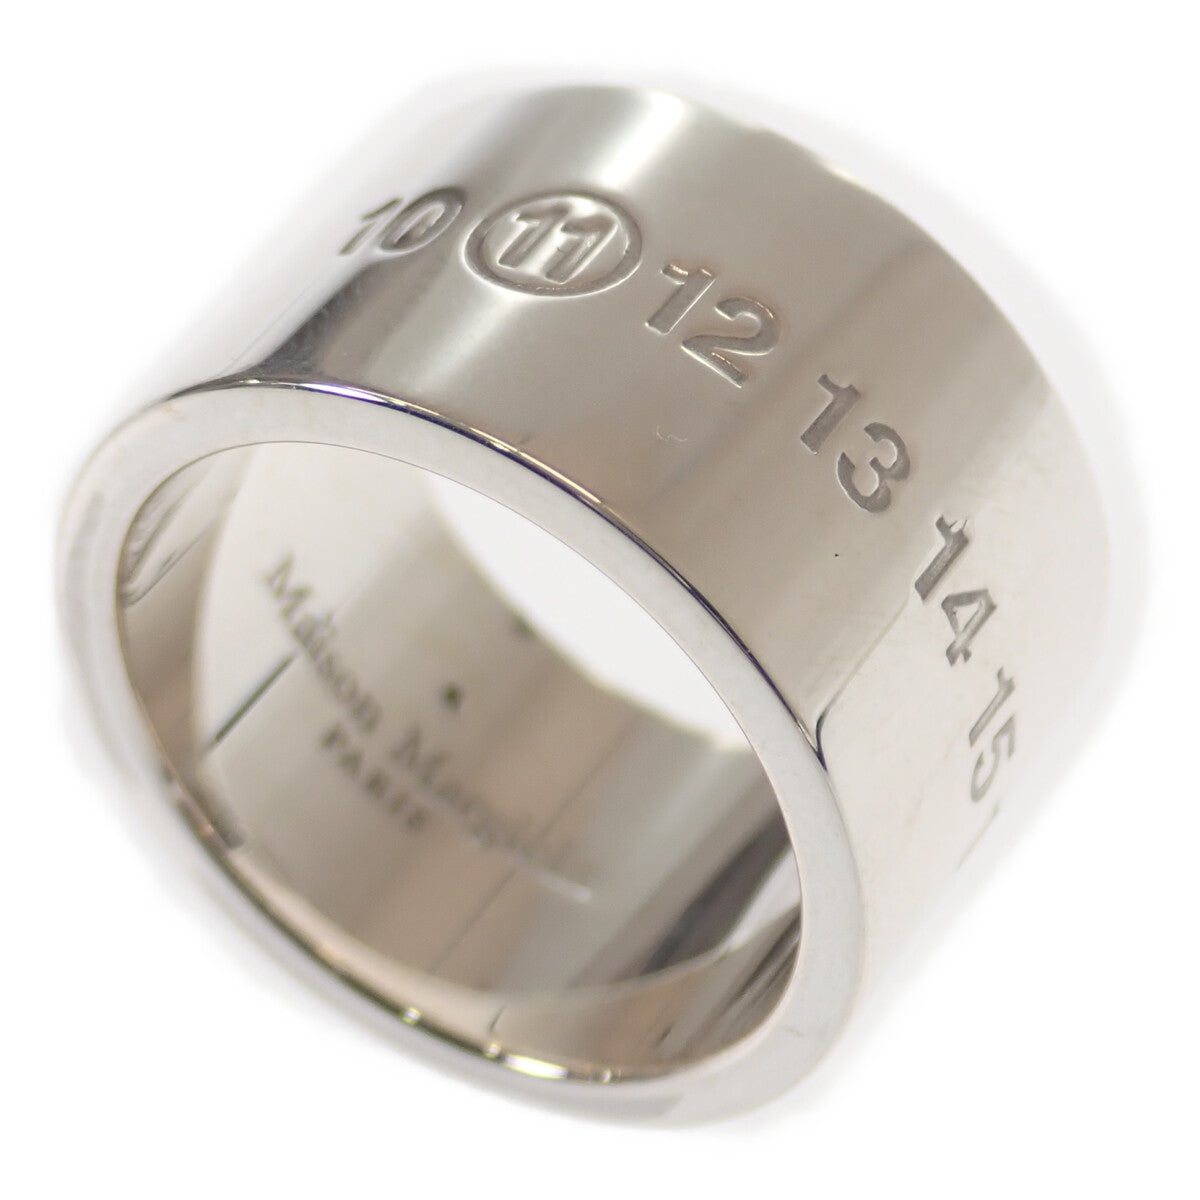 [LuxUness]  Maison Margiela Logo Number Ring in Silver 925, Unisex, Size 18 - 433873 in Excellent condition